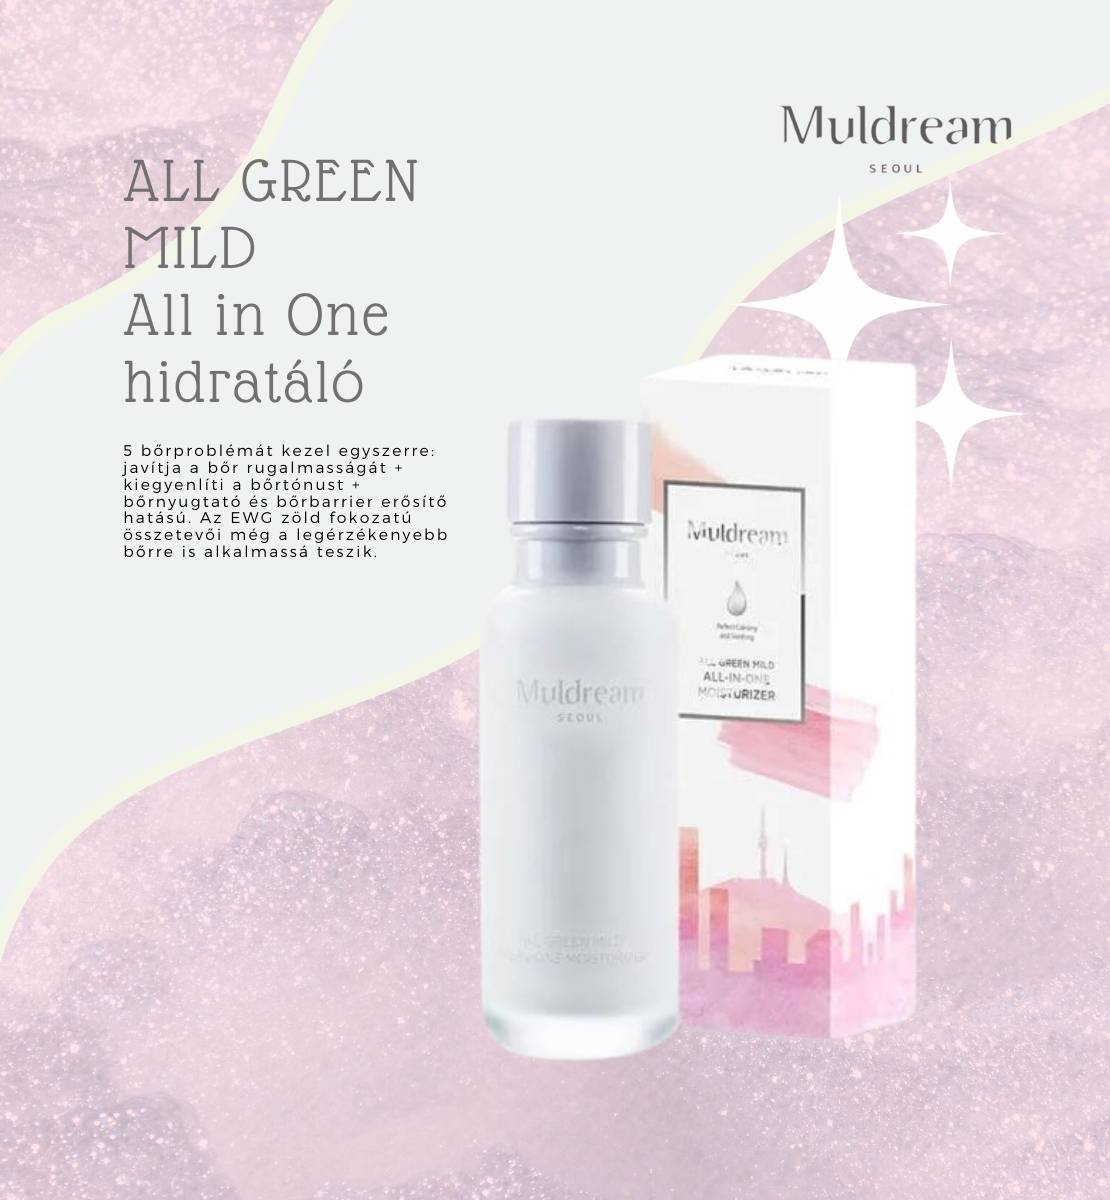 Muldream-all-green-mild-all-in-one-lotion-leiras